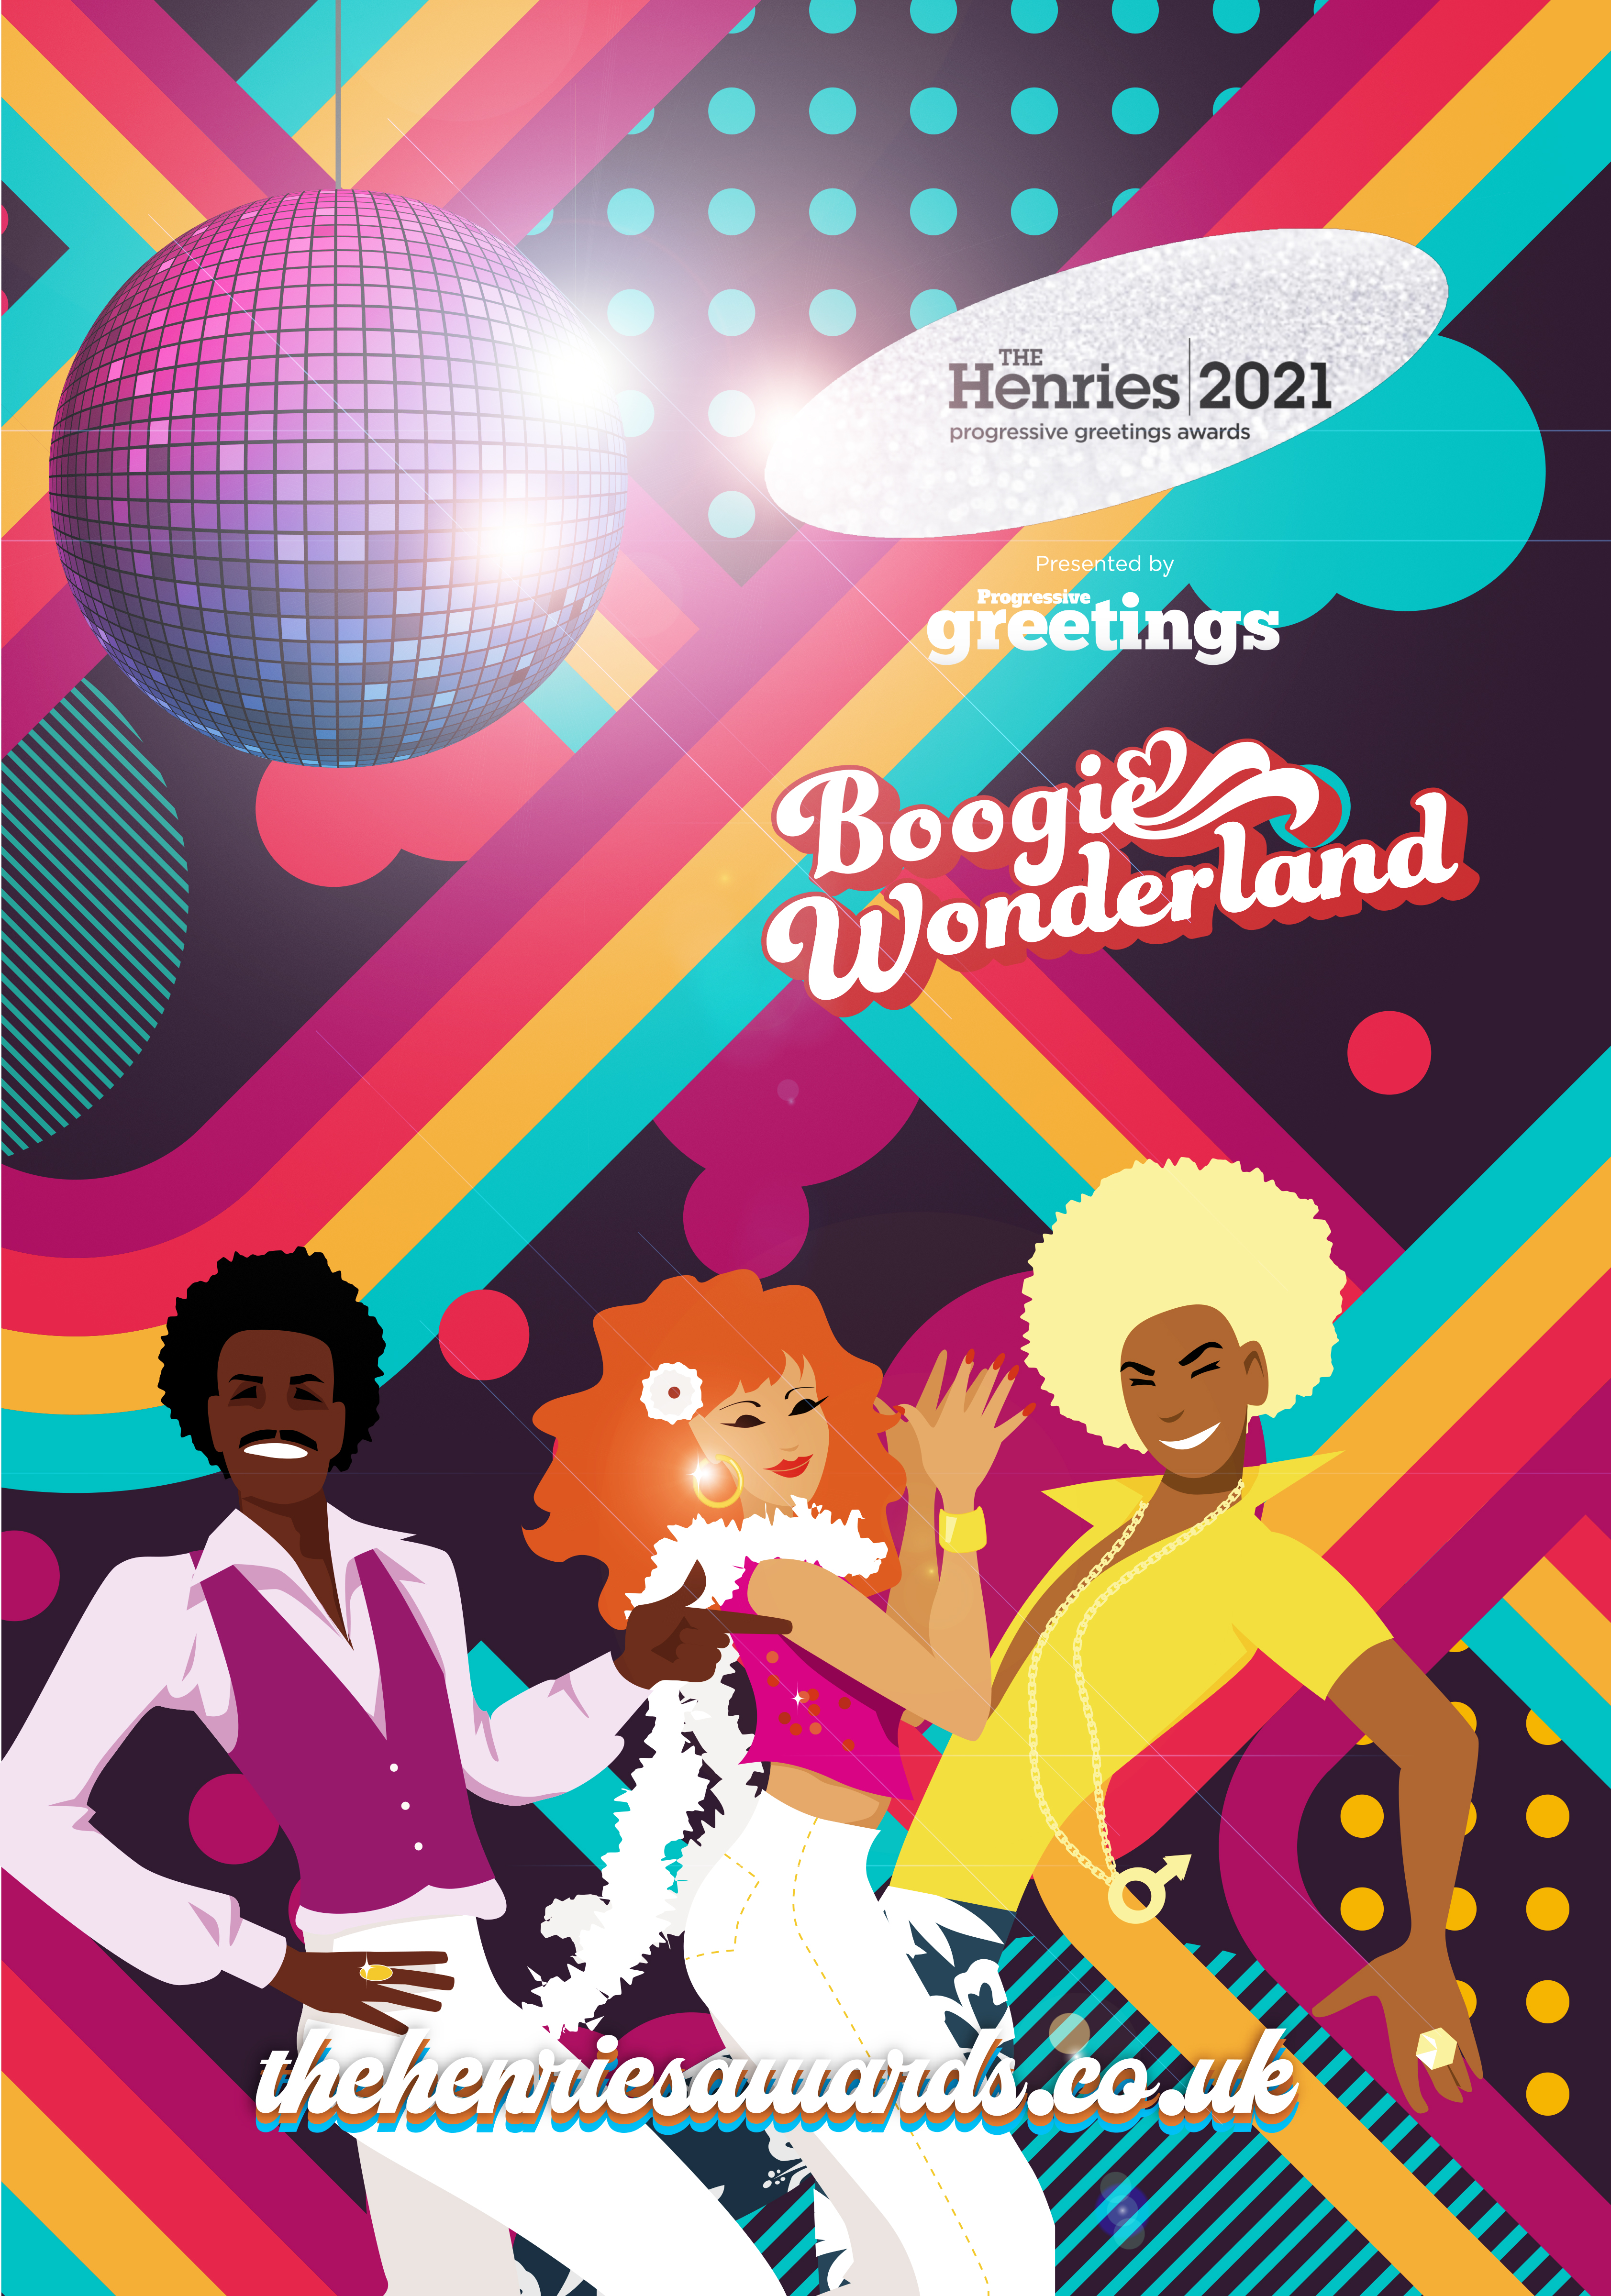 Above: The Henries 2021 will take on a Boogie Wonderland theme.